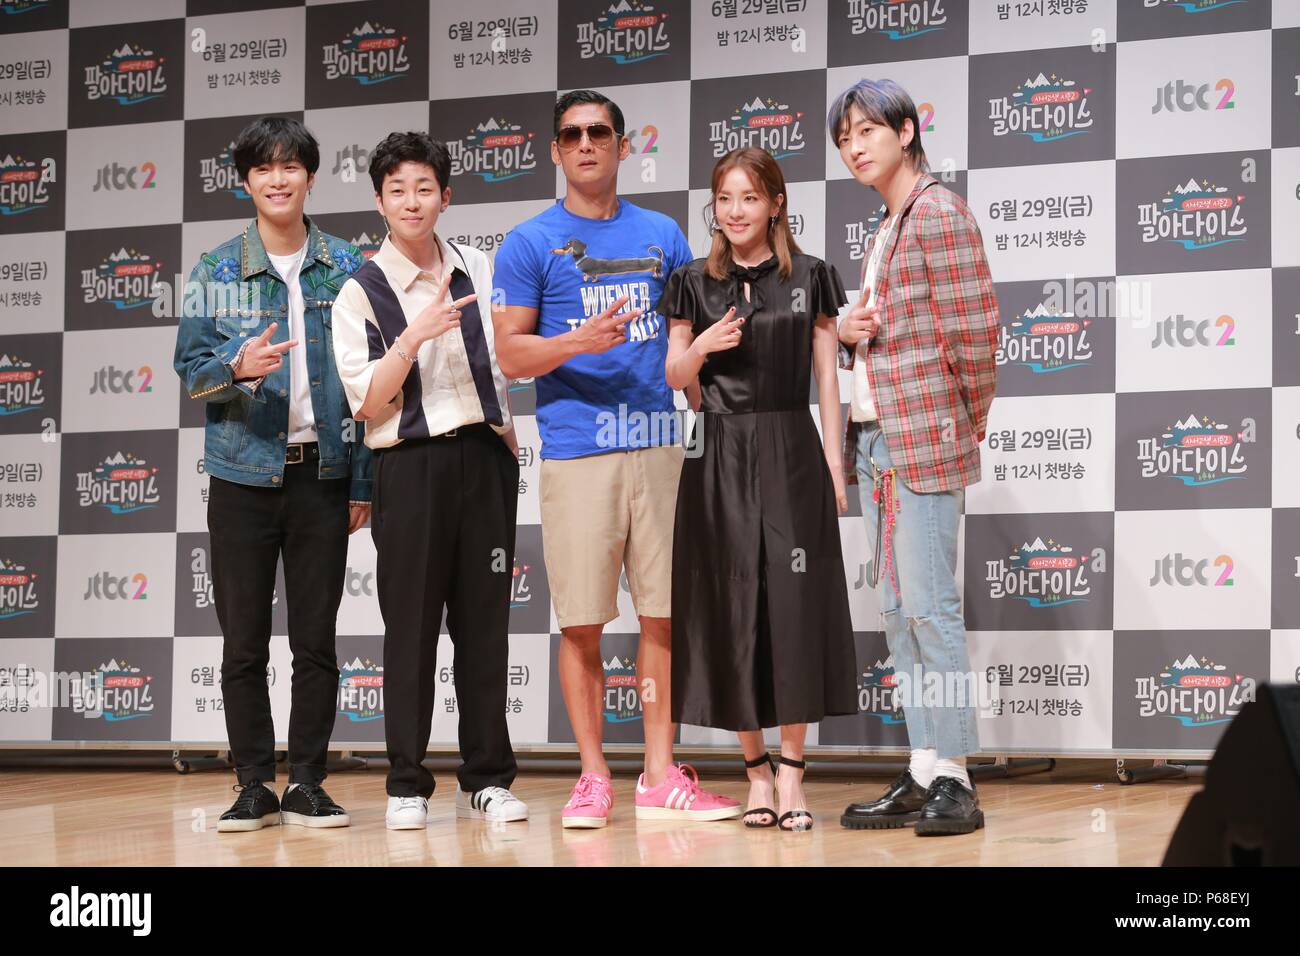 Seoul, Korea. 28th June, 2018. Super Junior Eunhyuk, NU'EST W JR, singer Park Joon Hyung, Sandara Park, DinDin etc. attended the production conference of JTBC¡®s TV show 'Buy Hard 2' in Seoul, Korea on 28th June, 2018.(China and Korea Rights Out) Credit: TopPhoto/Alamy Live News Stock Photo